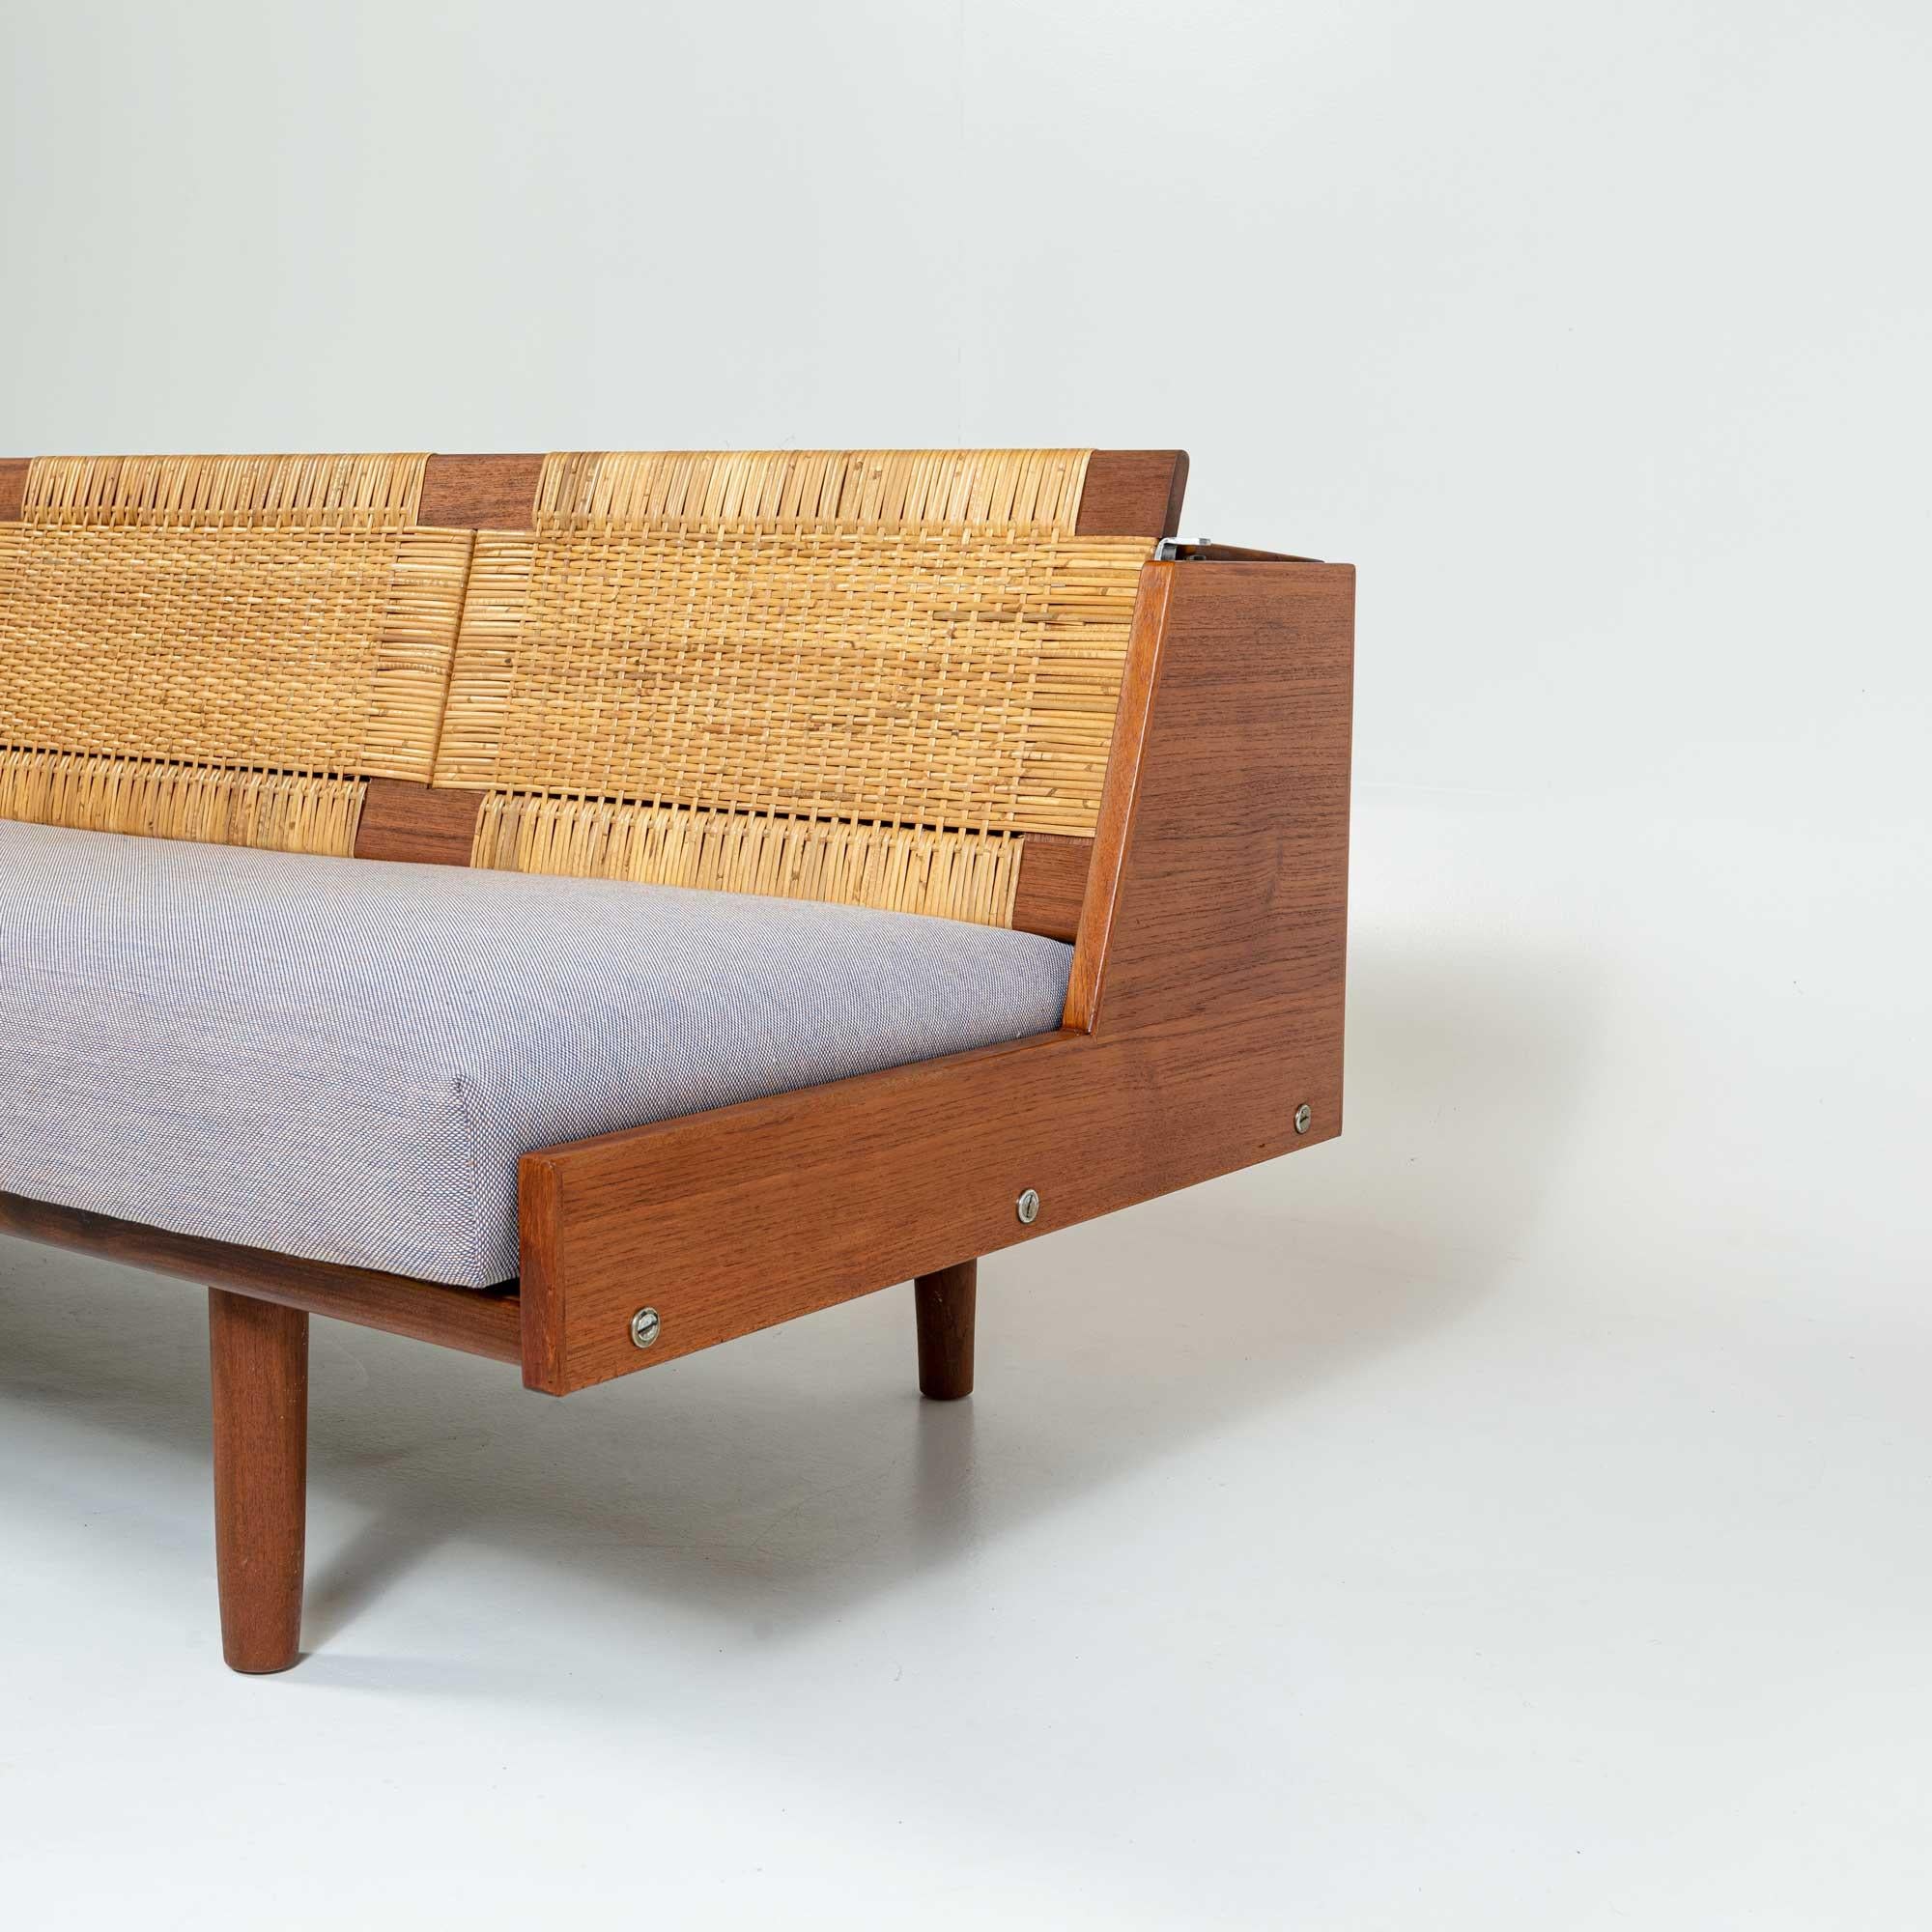 Mid-20th Century Hans J. Wegner for GETAMA Sofa Daybed Model GE7 in Teak and Cane 1950s For Sale